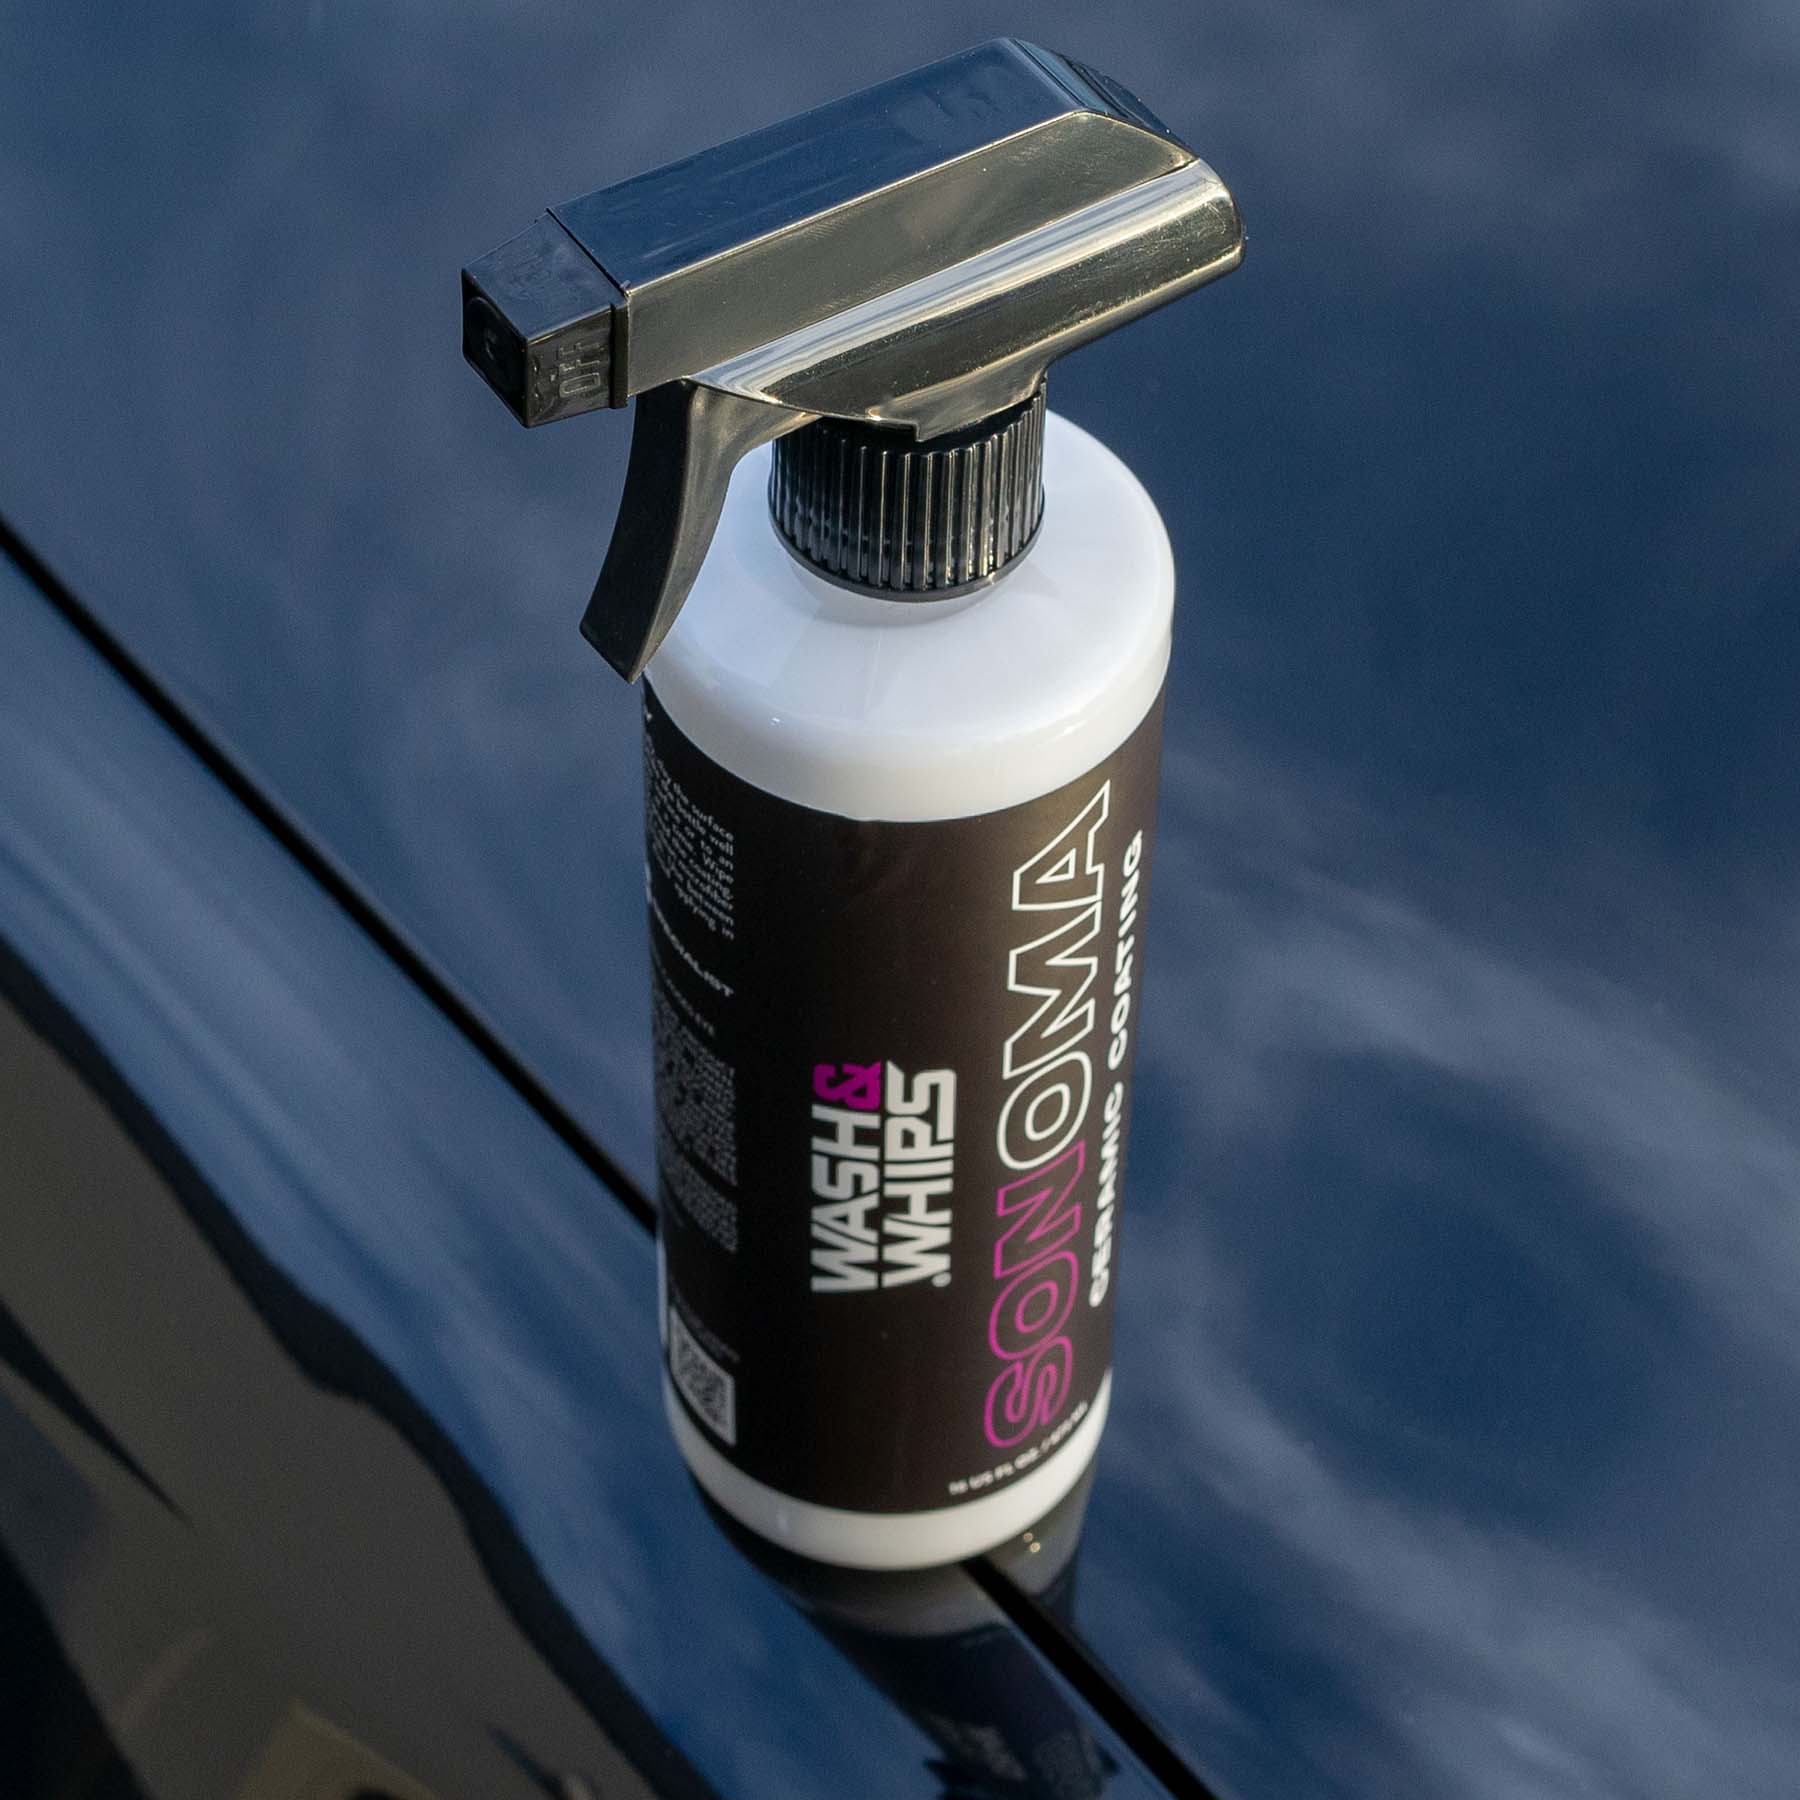 WASH&WHIPS Sonoma Ceramic Coating Spray | Durable | East to Apply | for Cars 16 oz